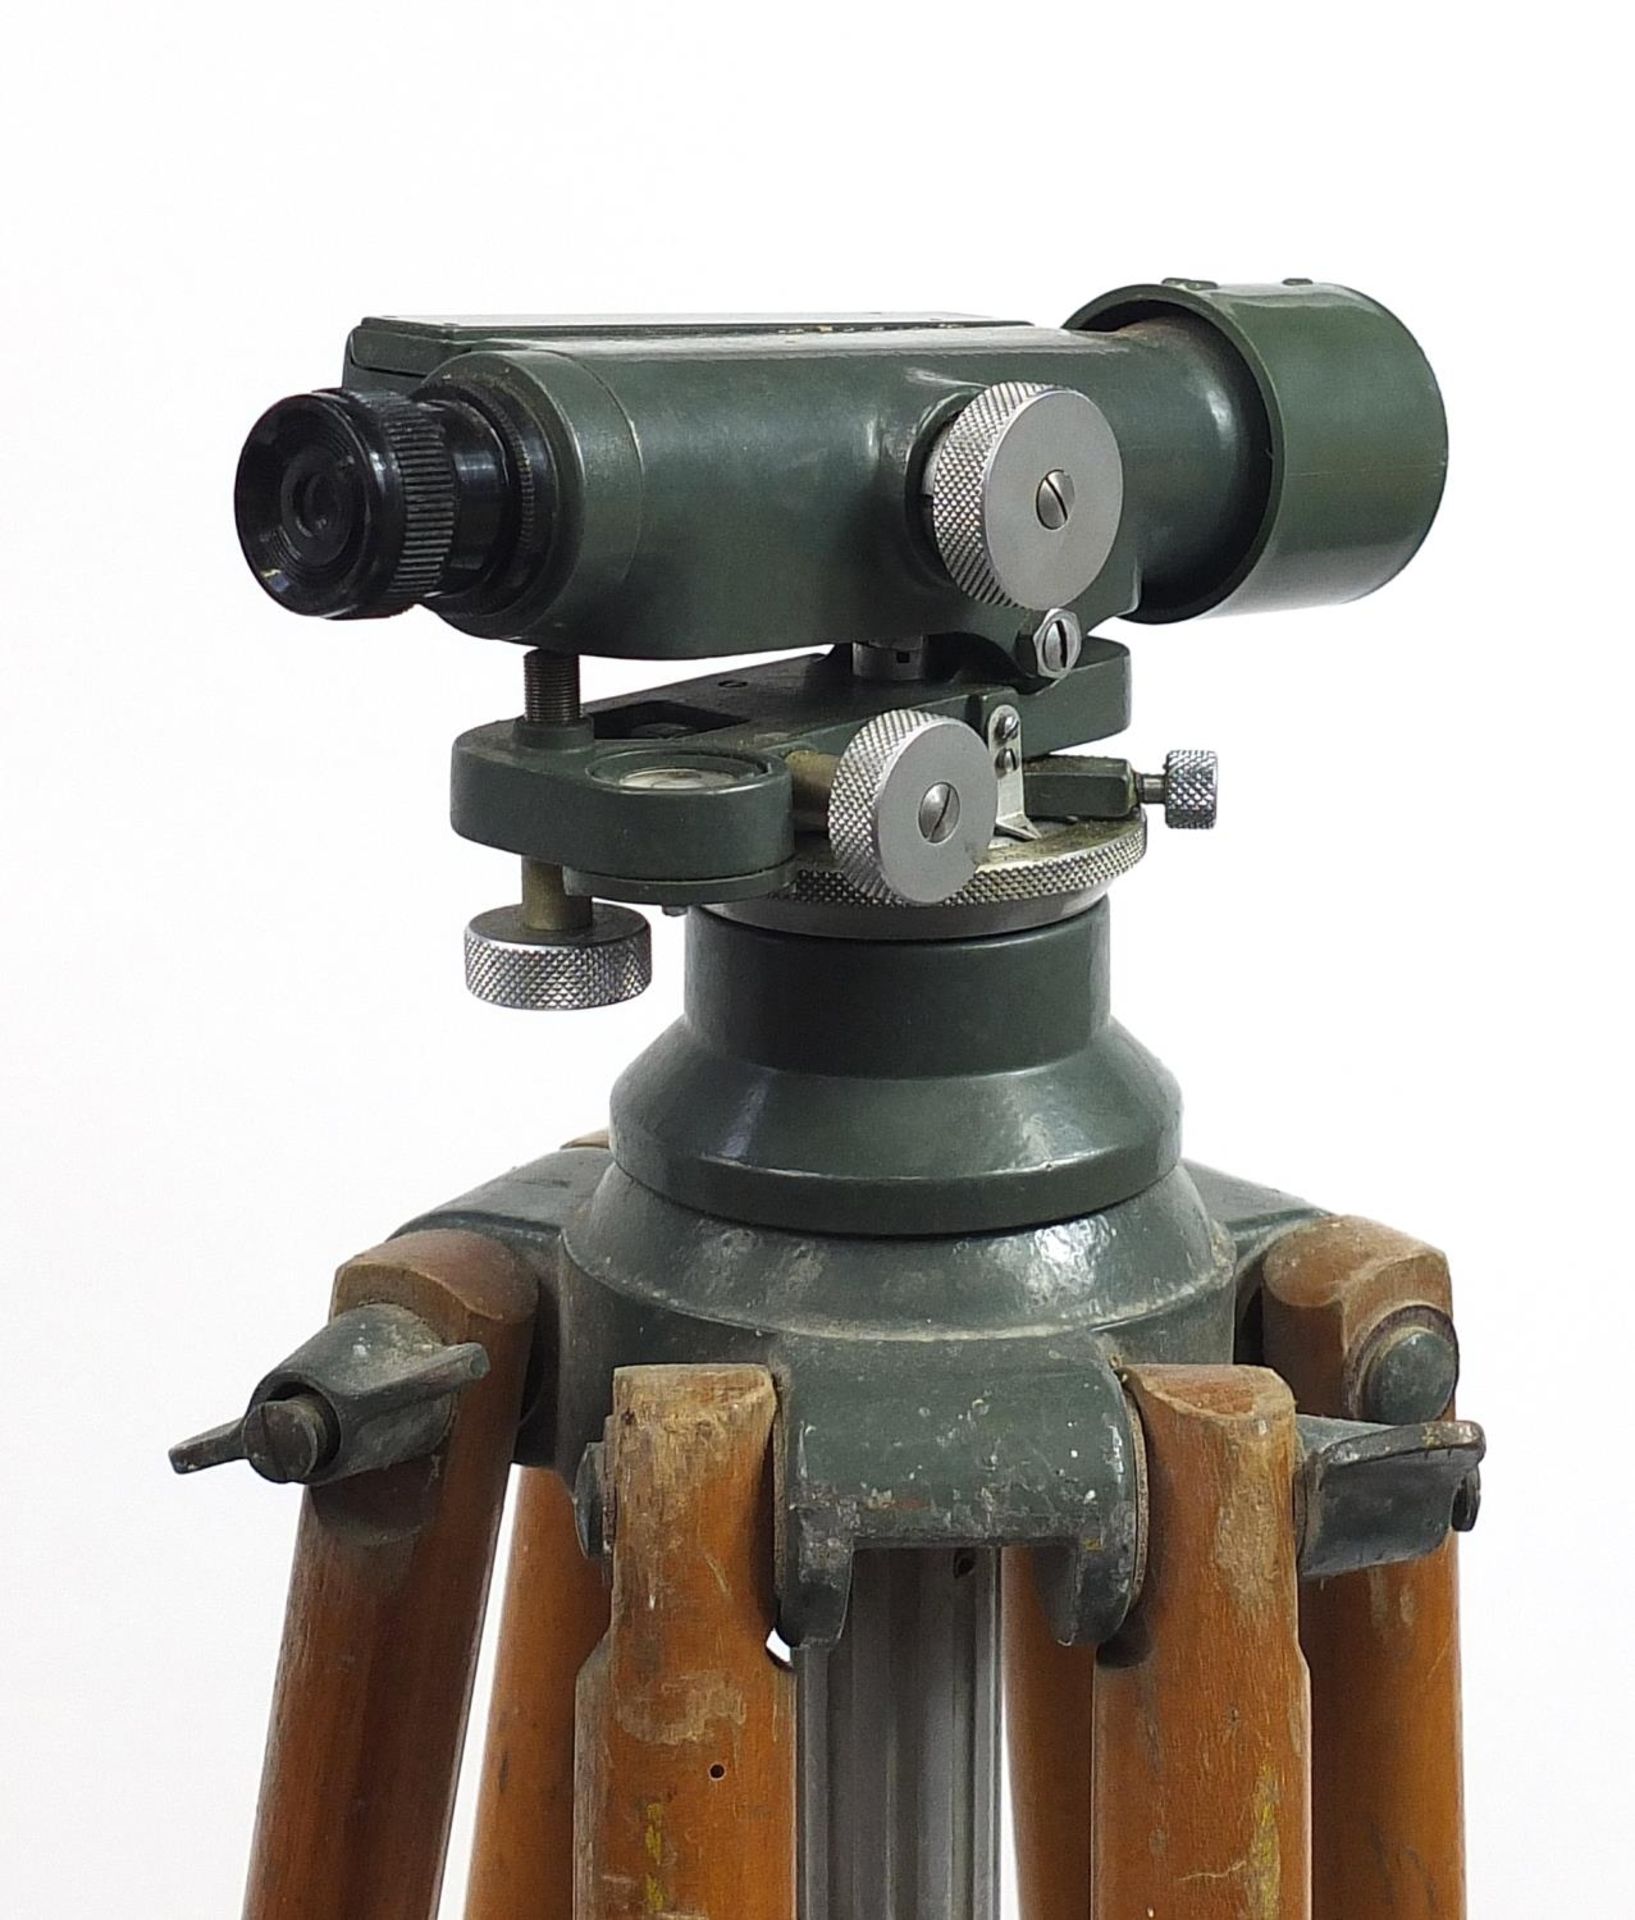 Hilger & Watts SL10-1 surveyor's level in leather case with tripod stand and measuring staff - Image 4 of 6